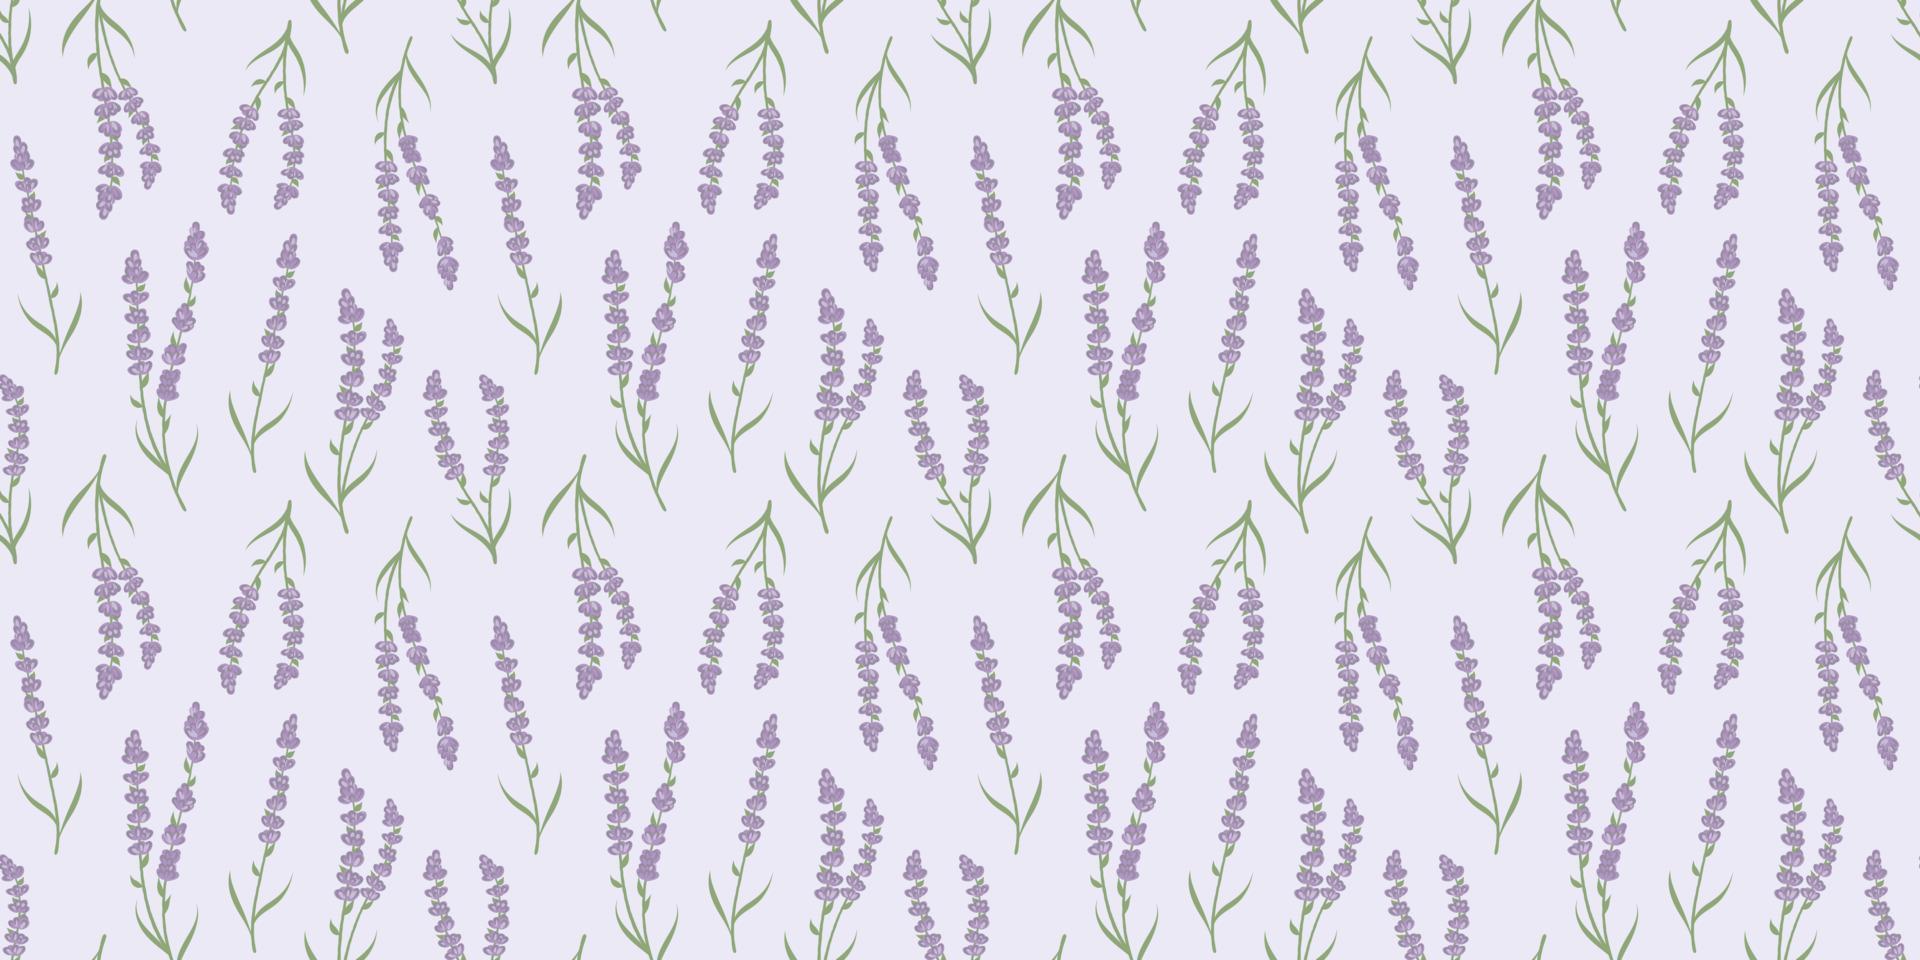 Lavender seamless repeat pattern background. vector